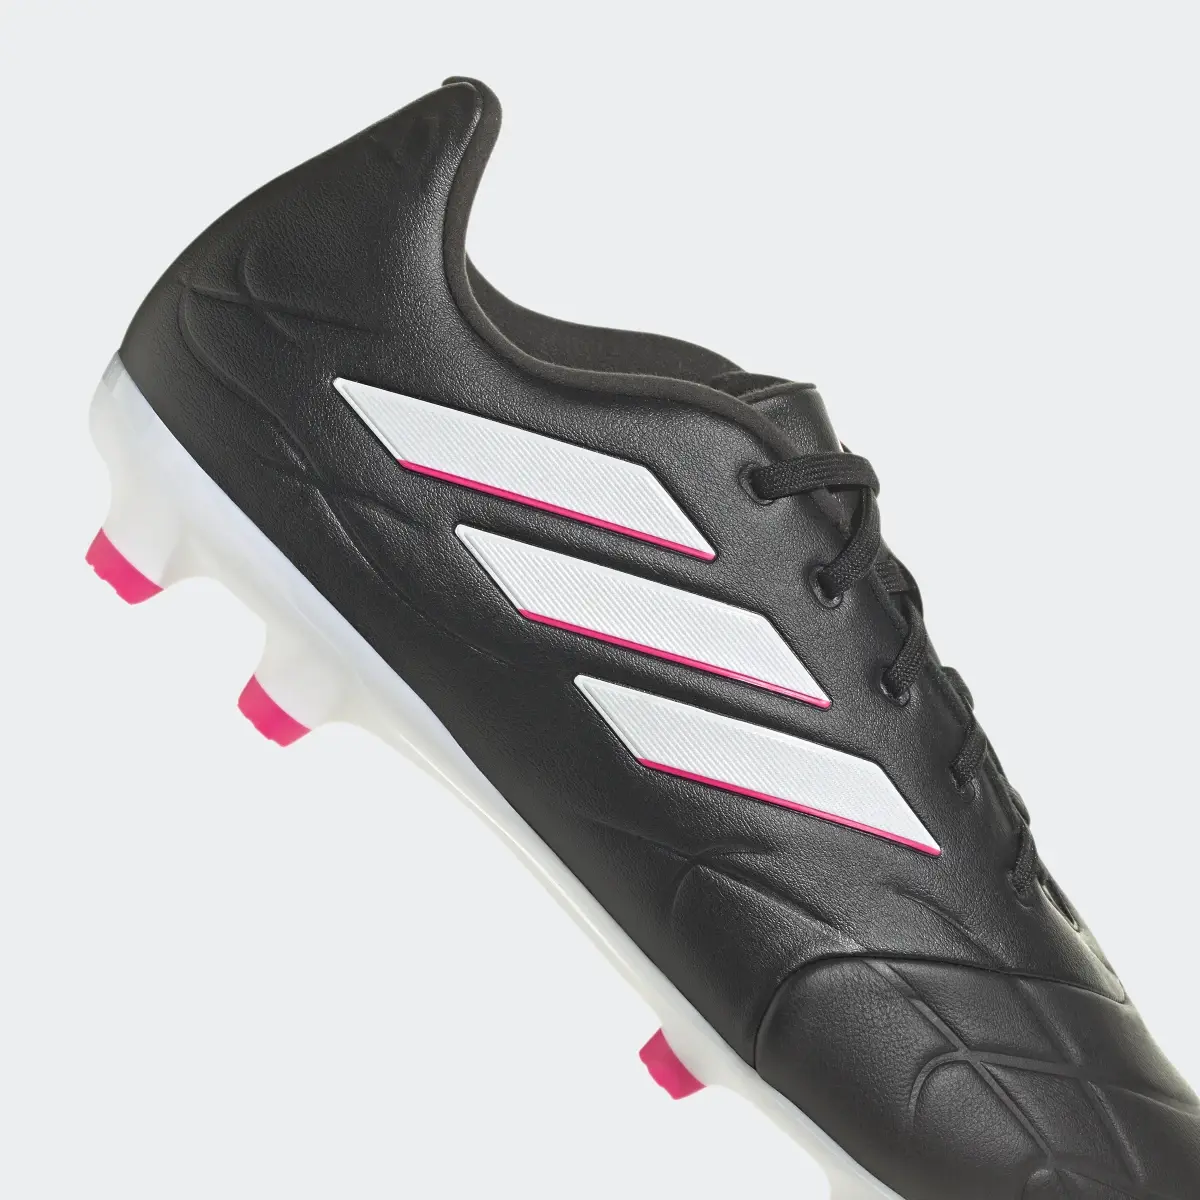 Adidas Copa Pure.3 Firm Ground Boots. 3